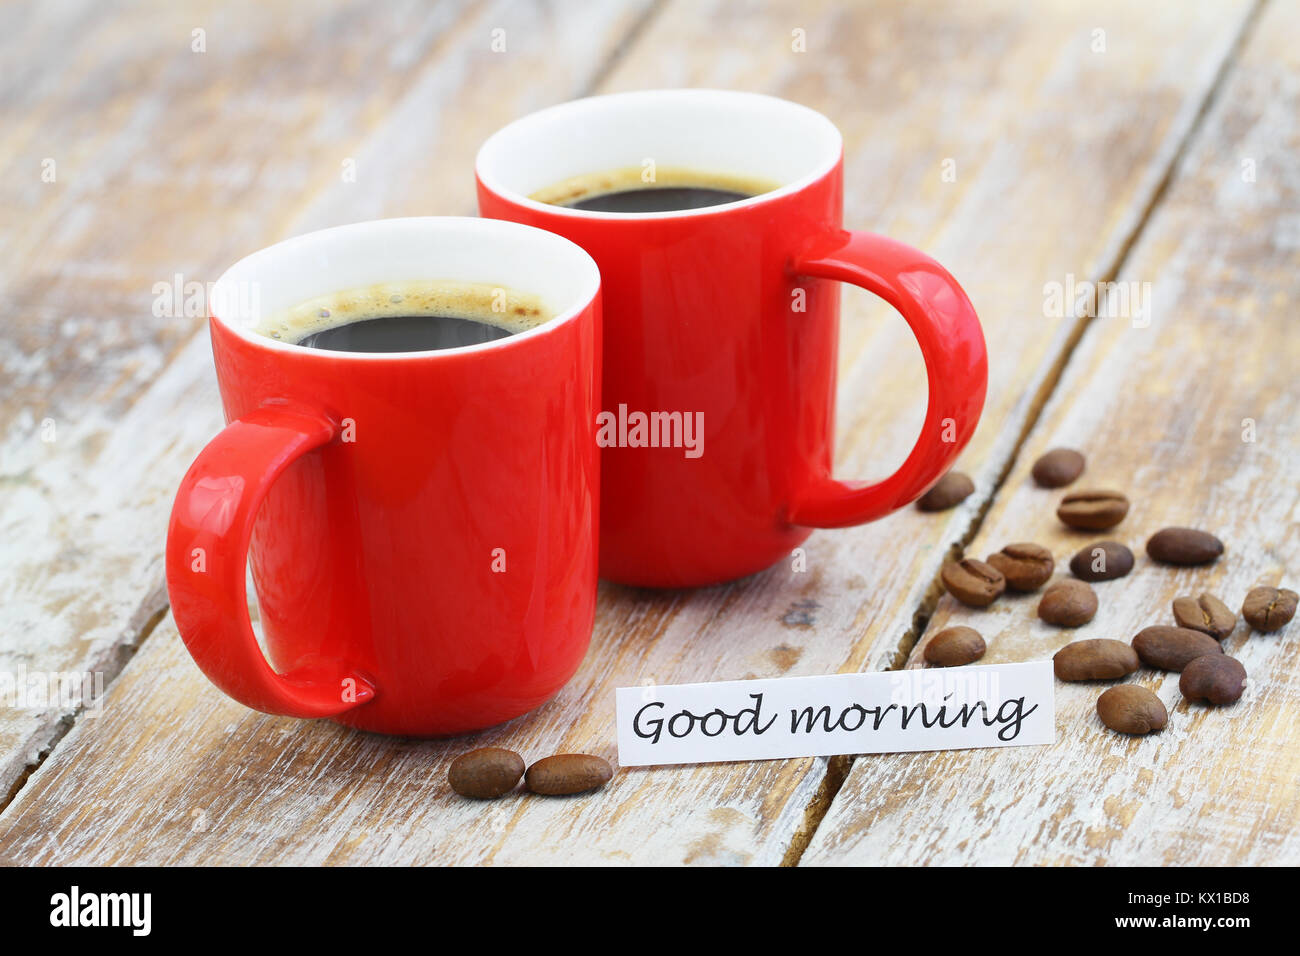 Good morning card with two red mugs of coffee and coffee beans on rustic surface Stock Photo